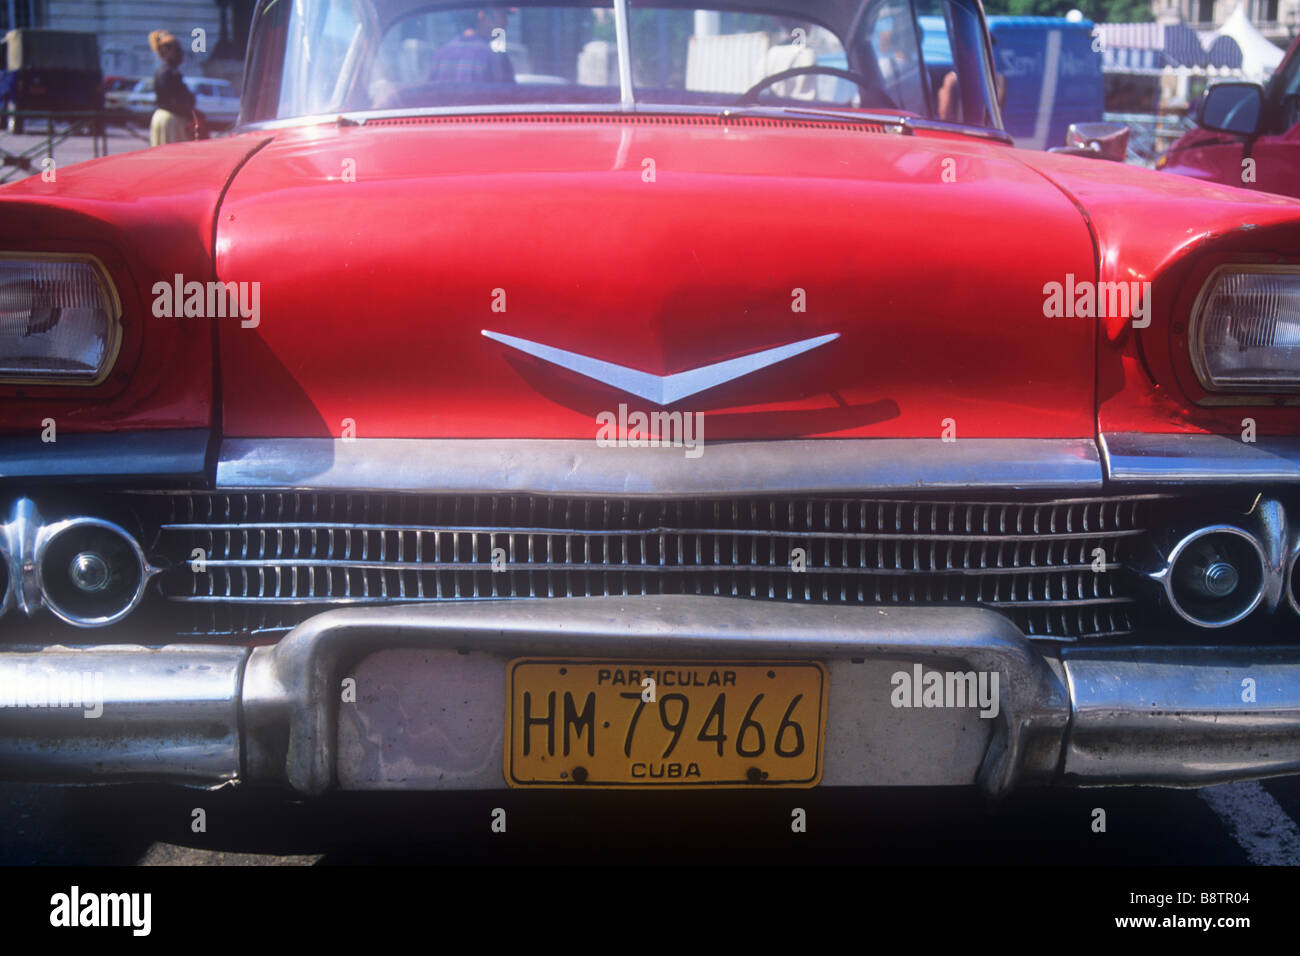 A vintage American car used as a taxi in Havana, Cuba Stock Photo